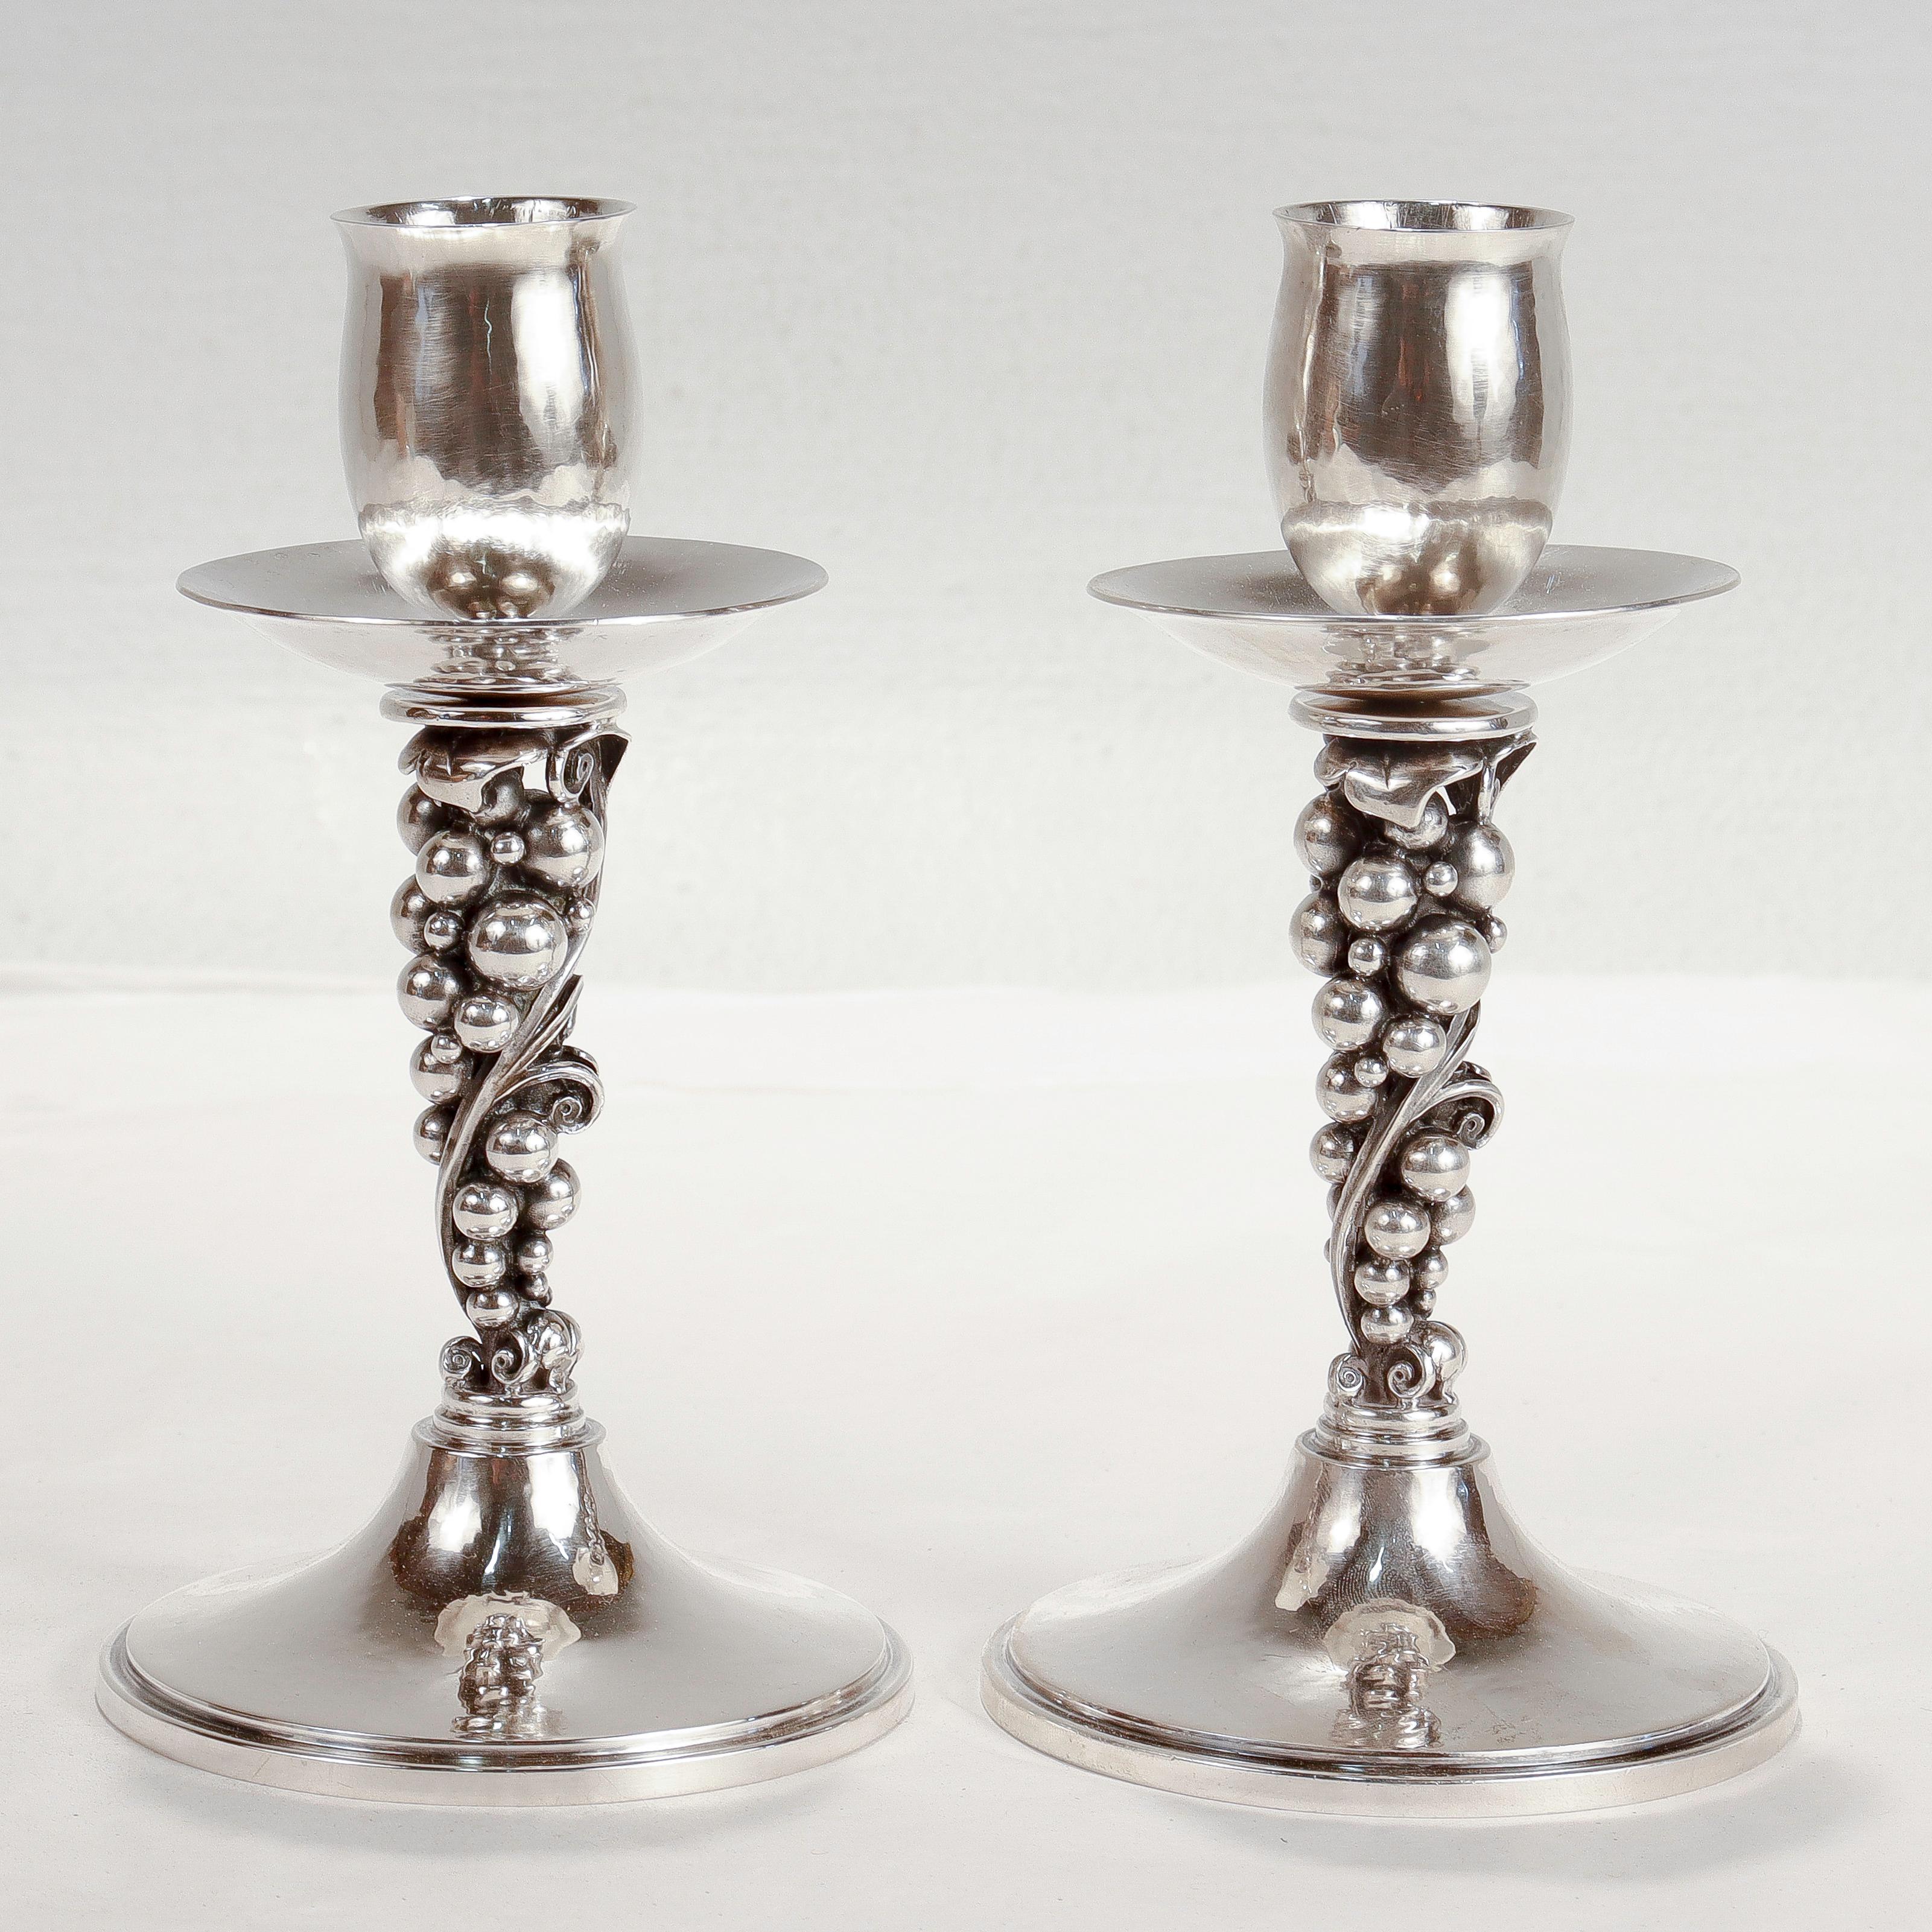 Pair of Signed Danish Modern Sterling Silver Grapes Candlesticks by Aage Weimar In Good Condition For Sale In Philadelphia, PA